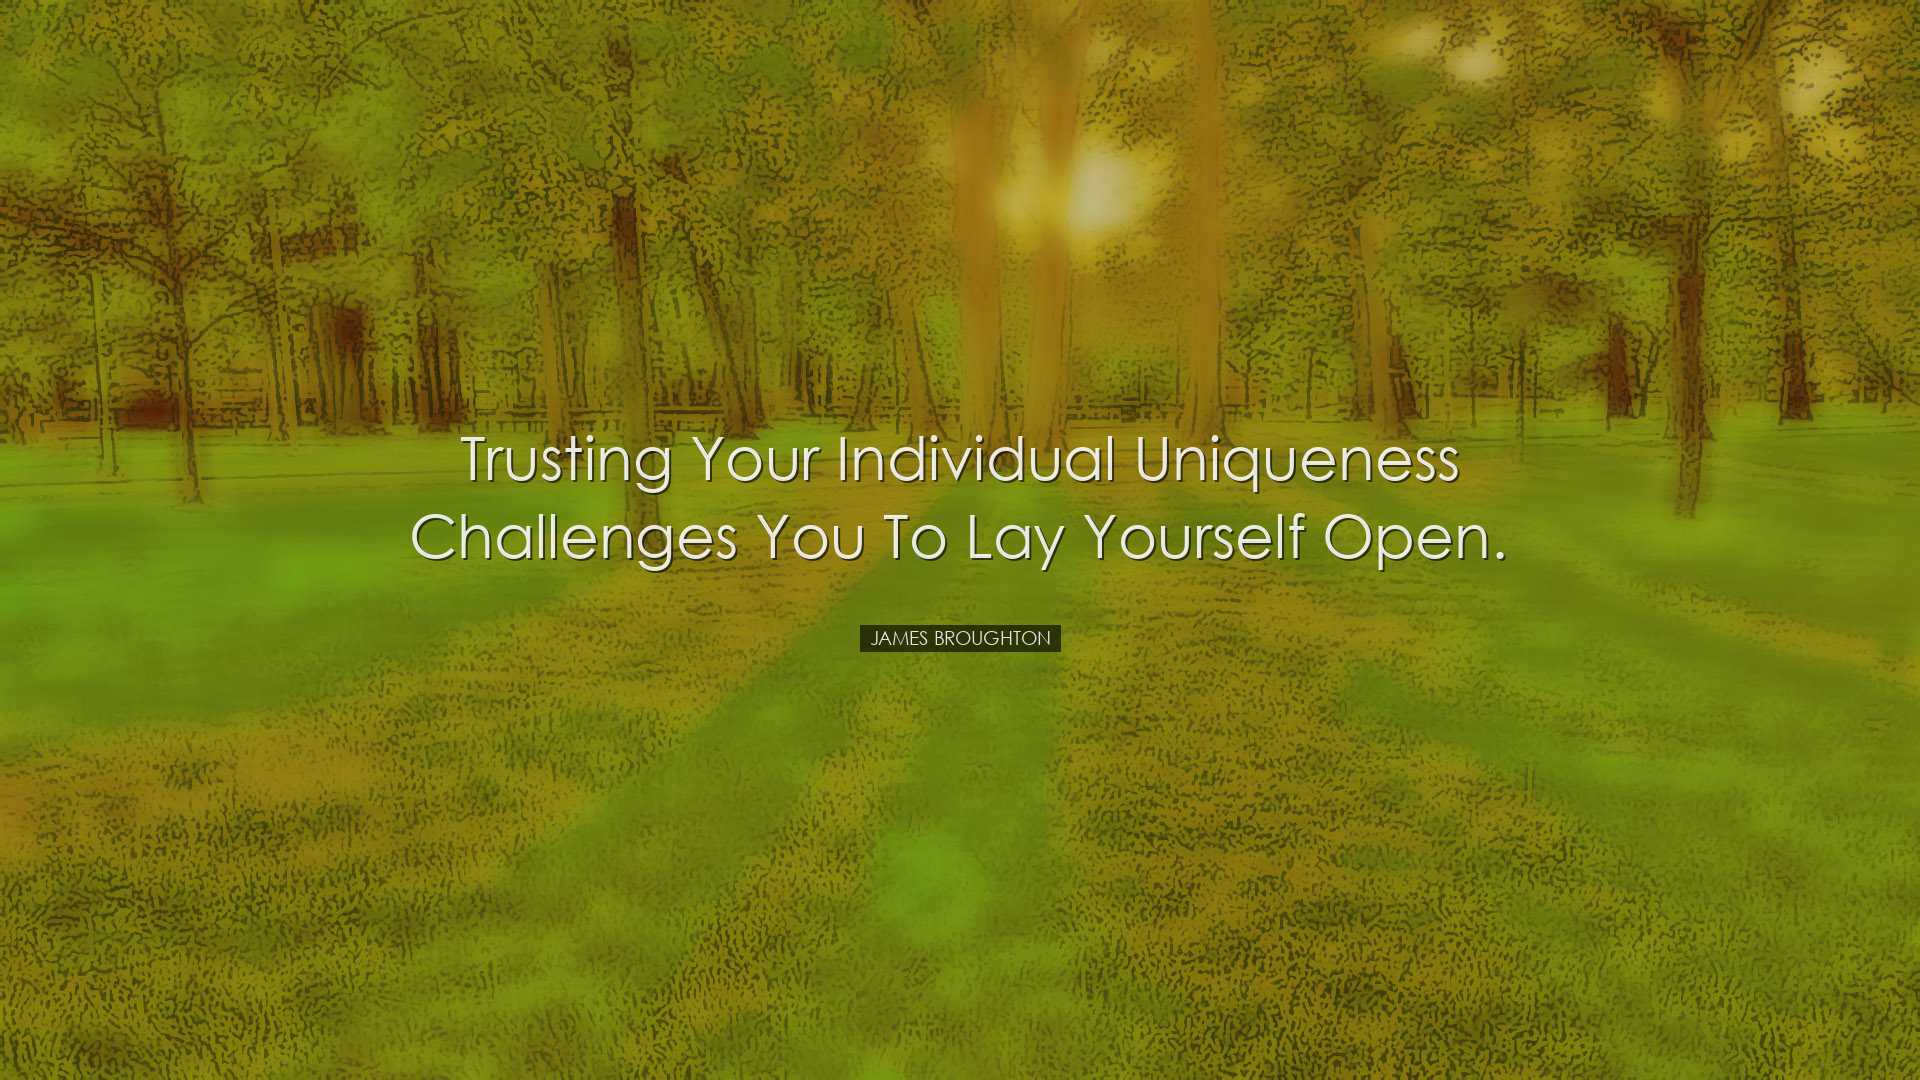 Trusting your individual uniqueness challenges you to lay yourself